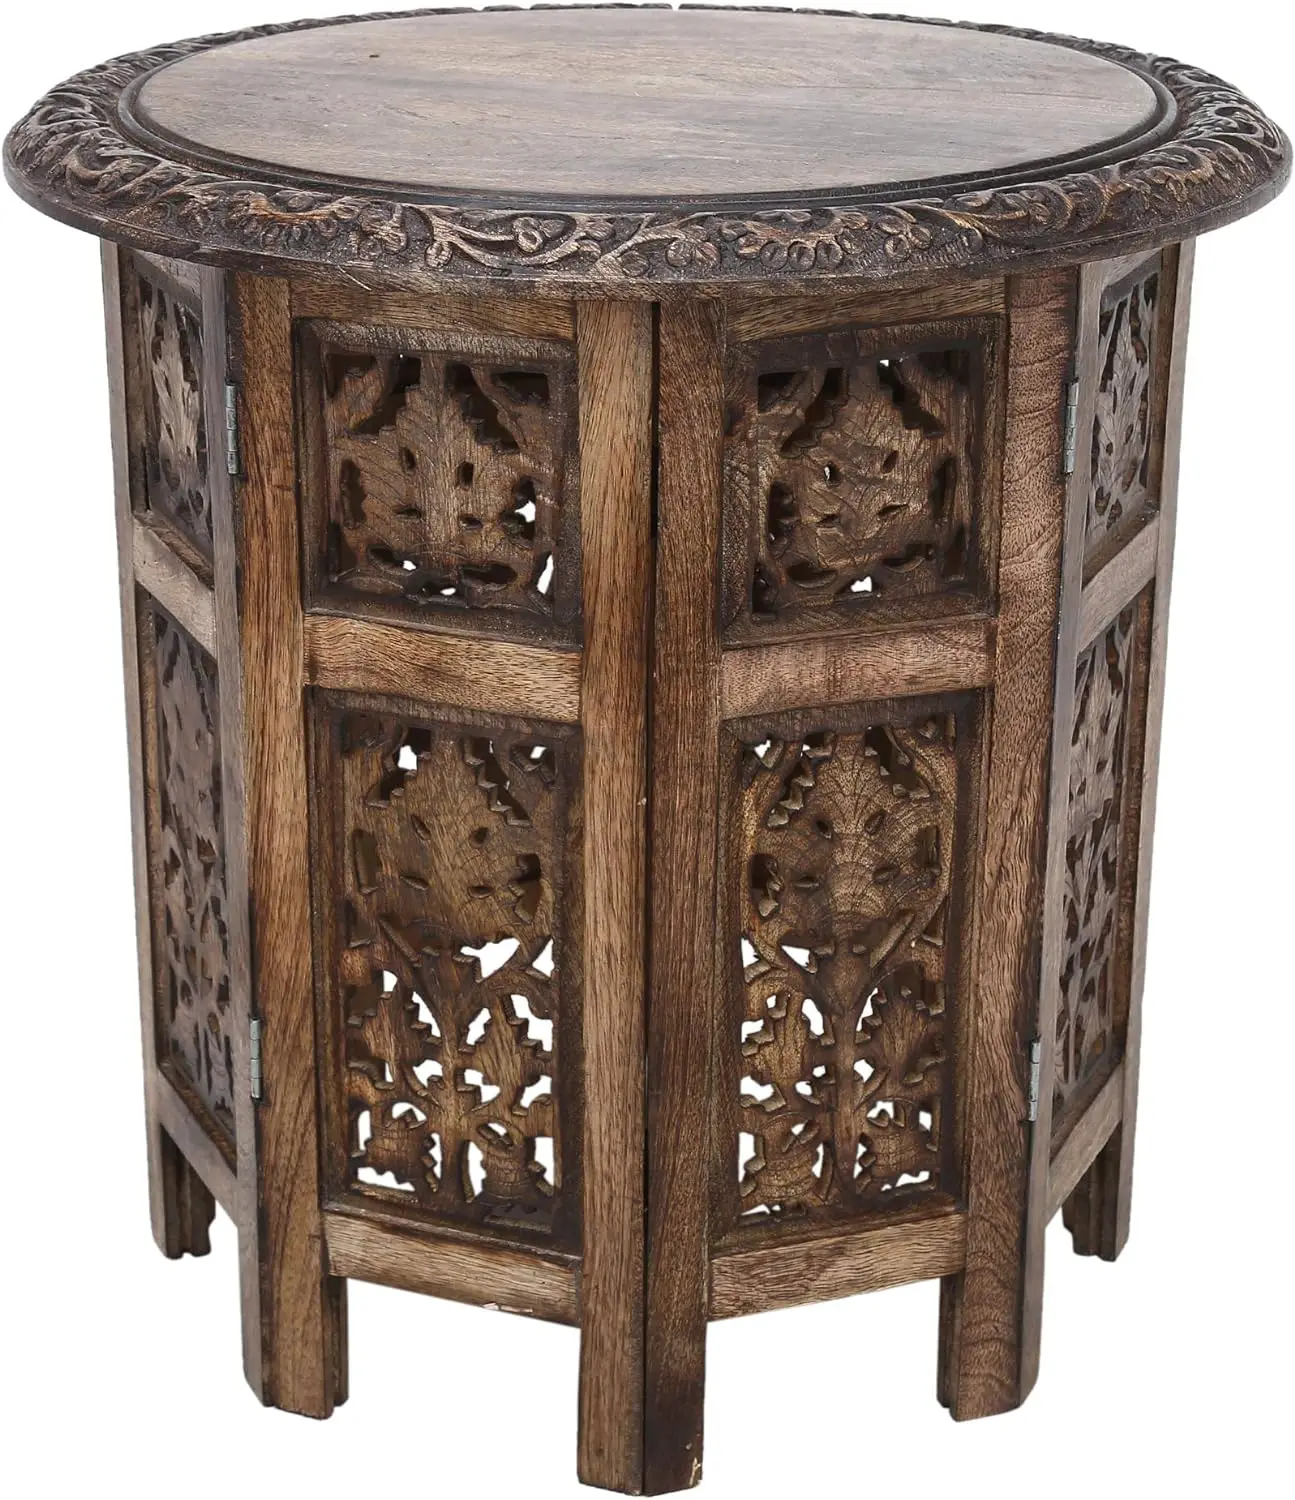 

Coffee Table Round Boho End Furniture Carved Room Wooden Side Indian Décor 18 Inches